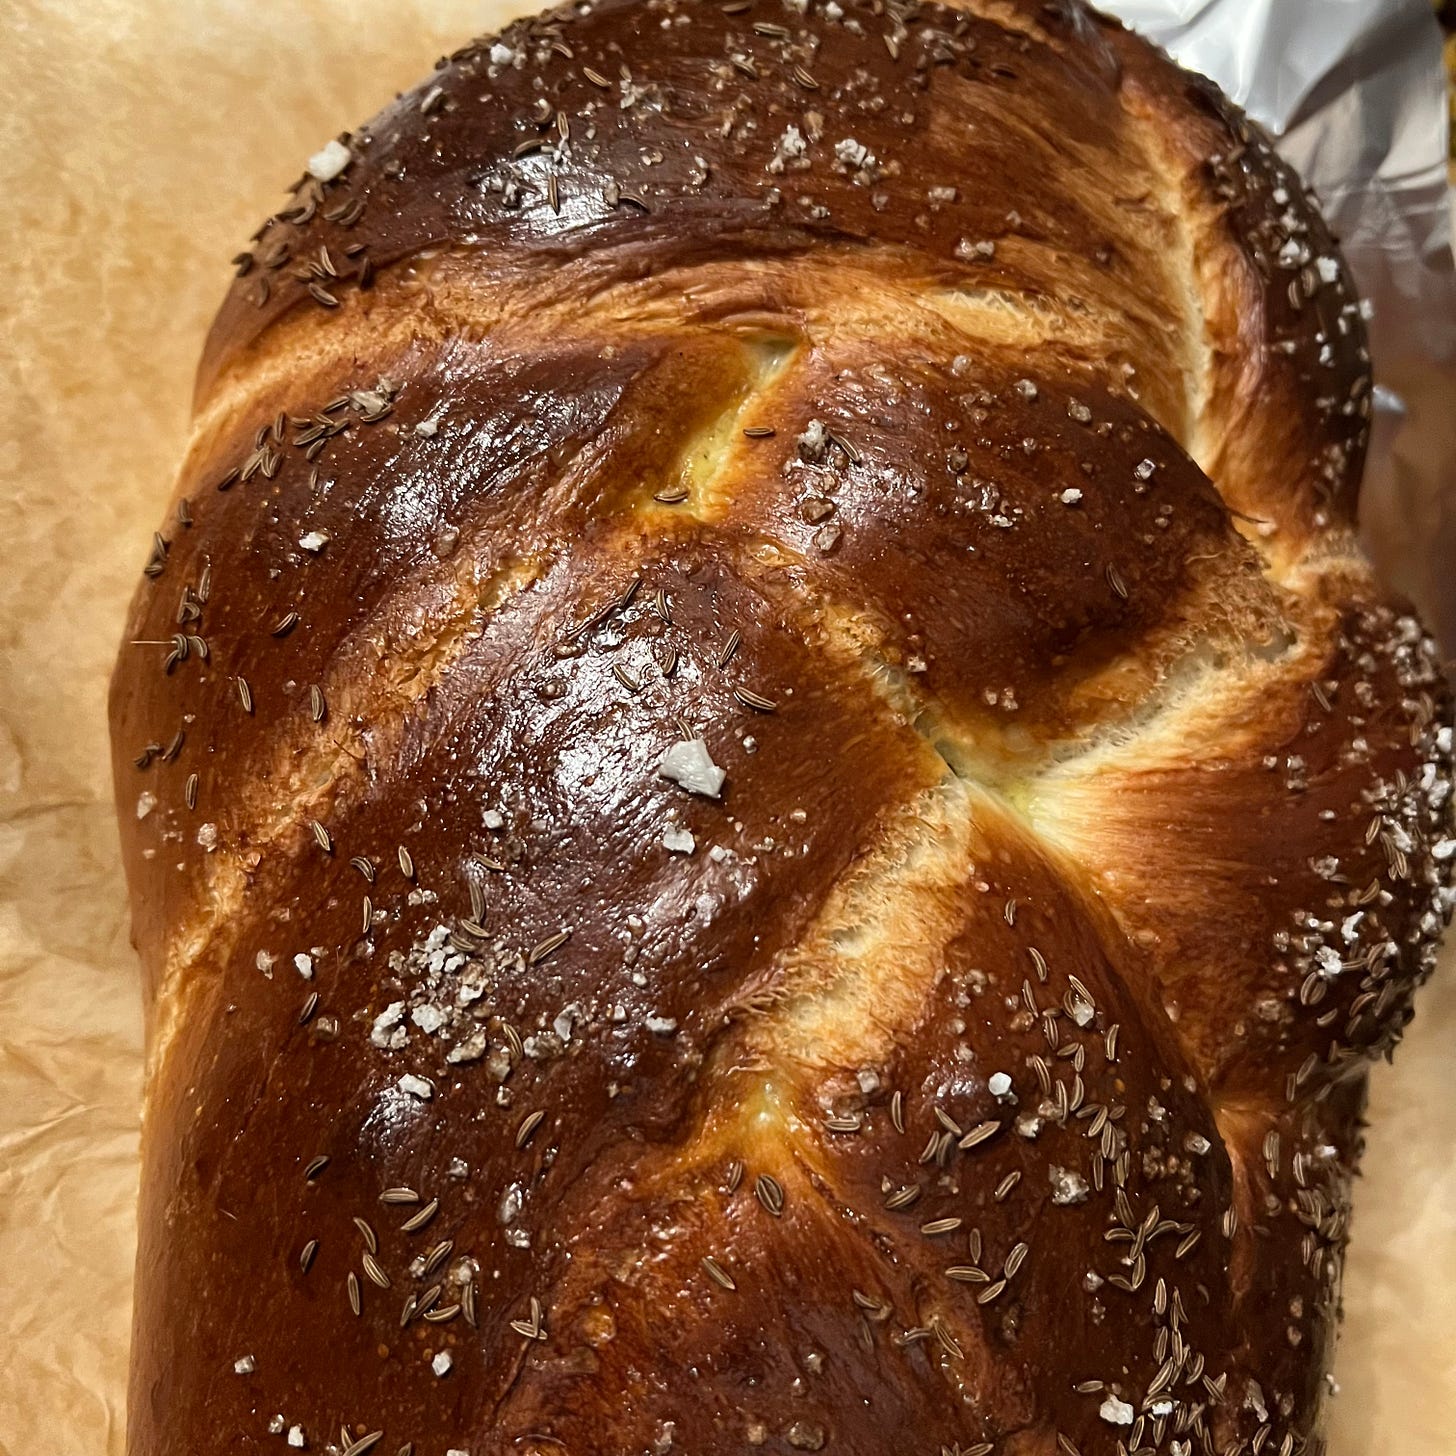 Big glossy baked plaited challah loaf dusted with caraway seeds and salt